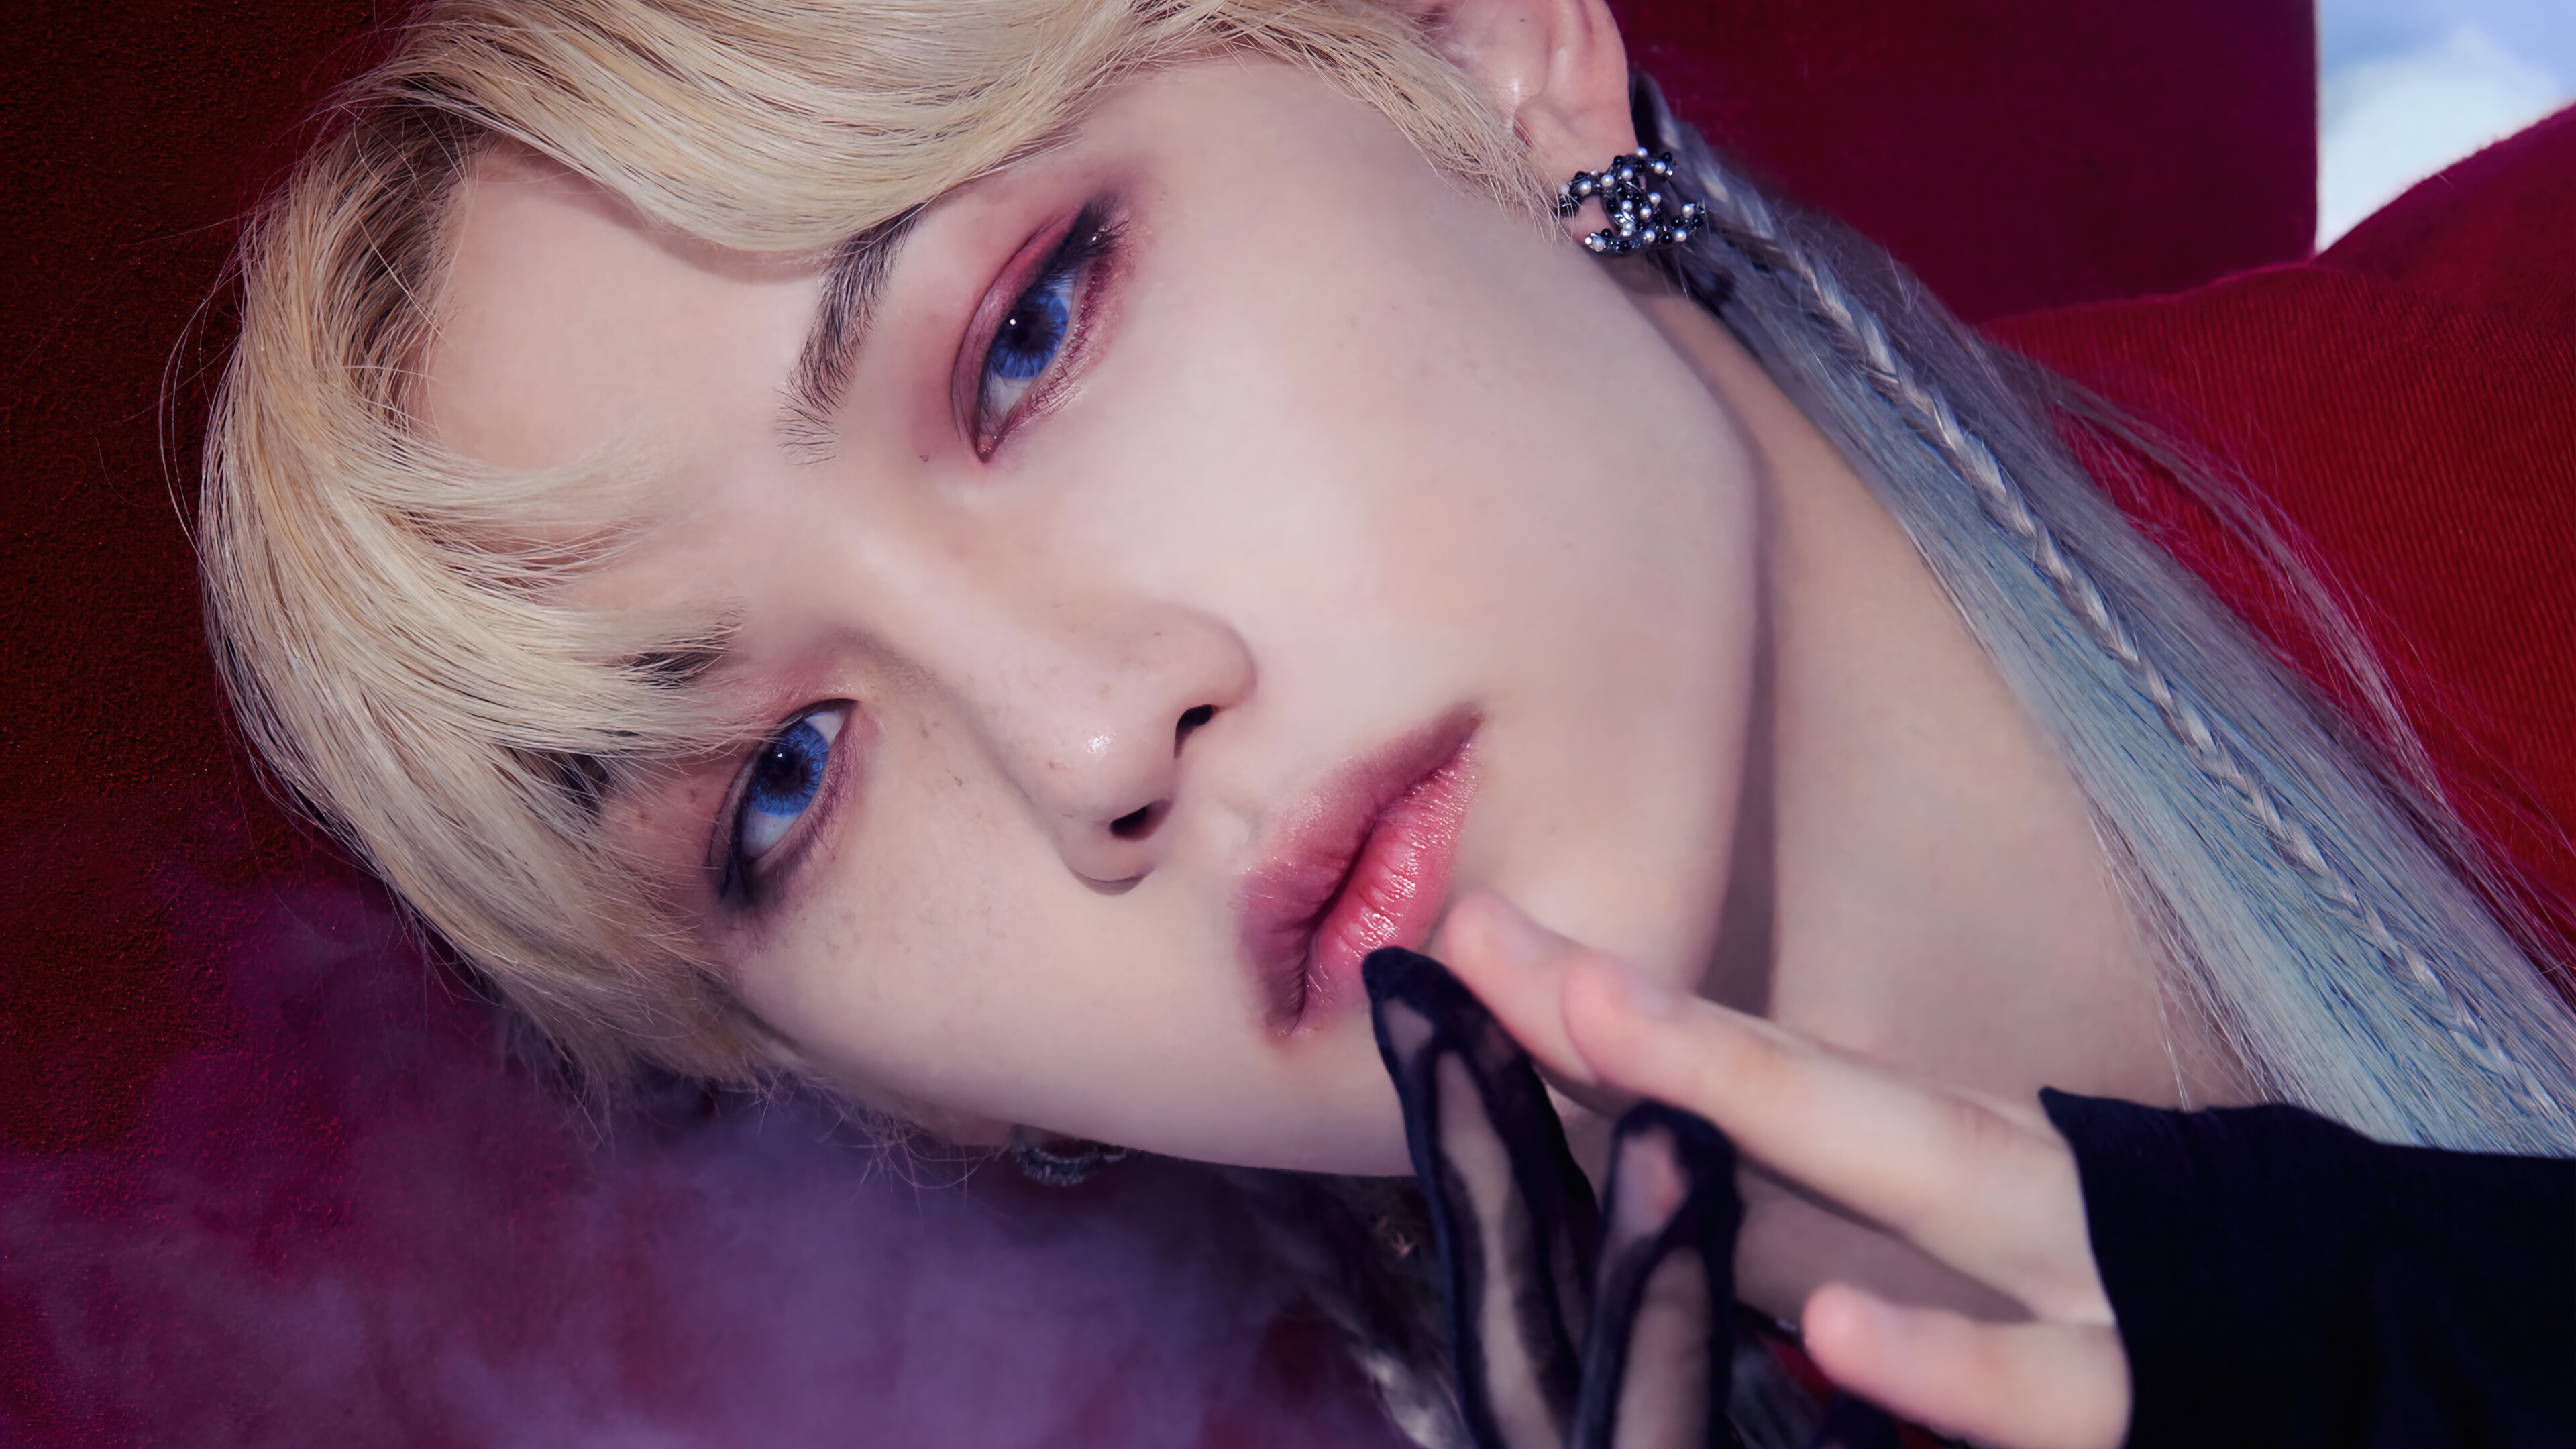 Stray Kids: Felix, Officially debuted on March 25, 2018, with the EP I Am Not. 3840x2160 4K Background.